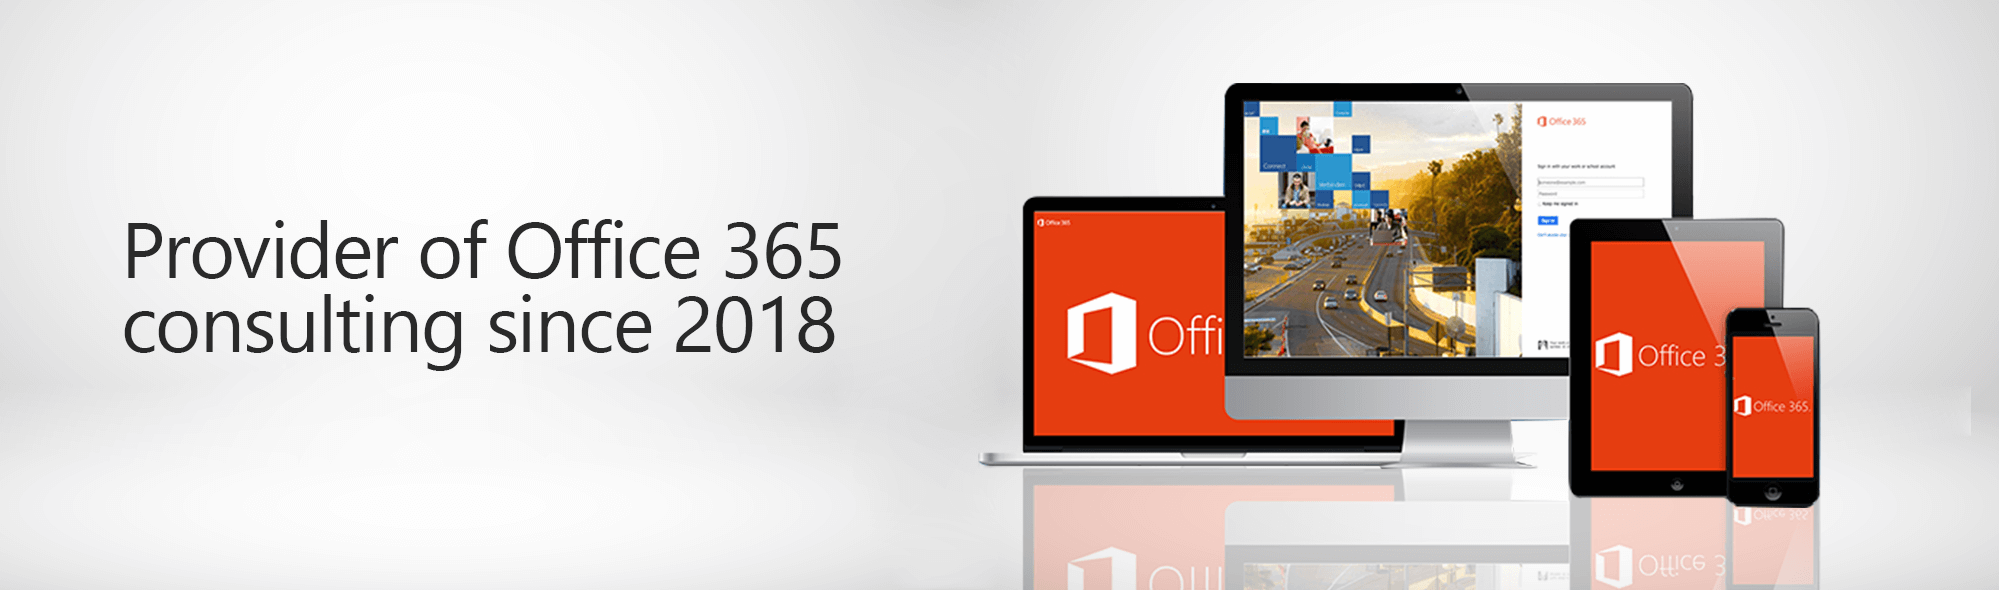 Provider of office 365 consulting since 2018